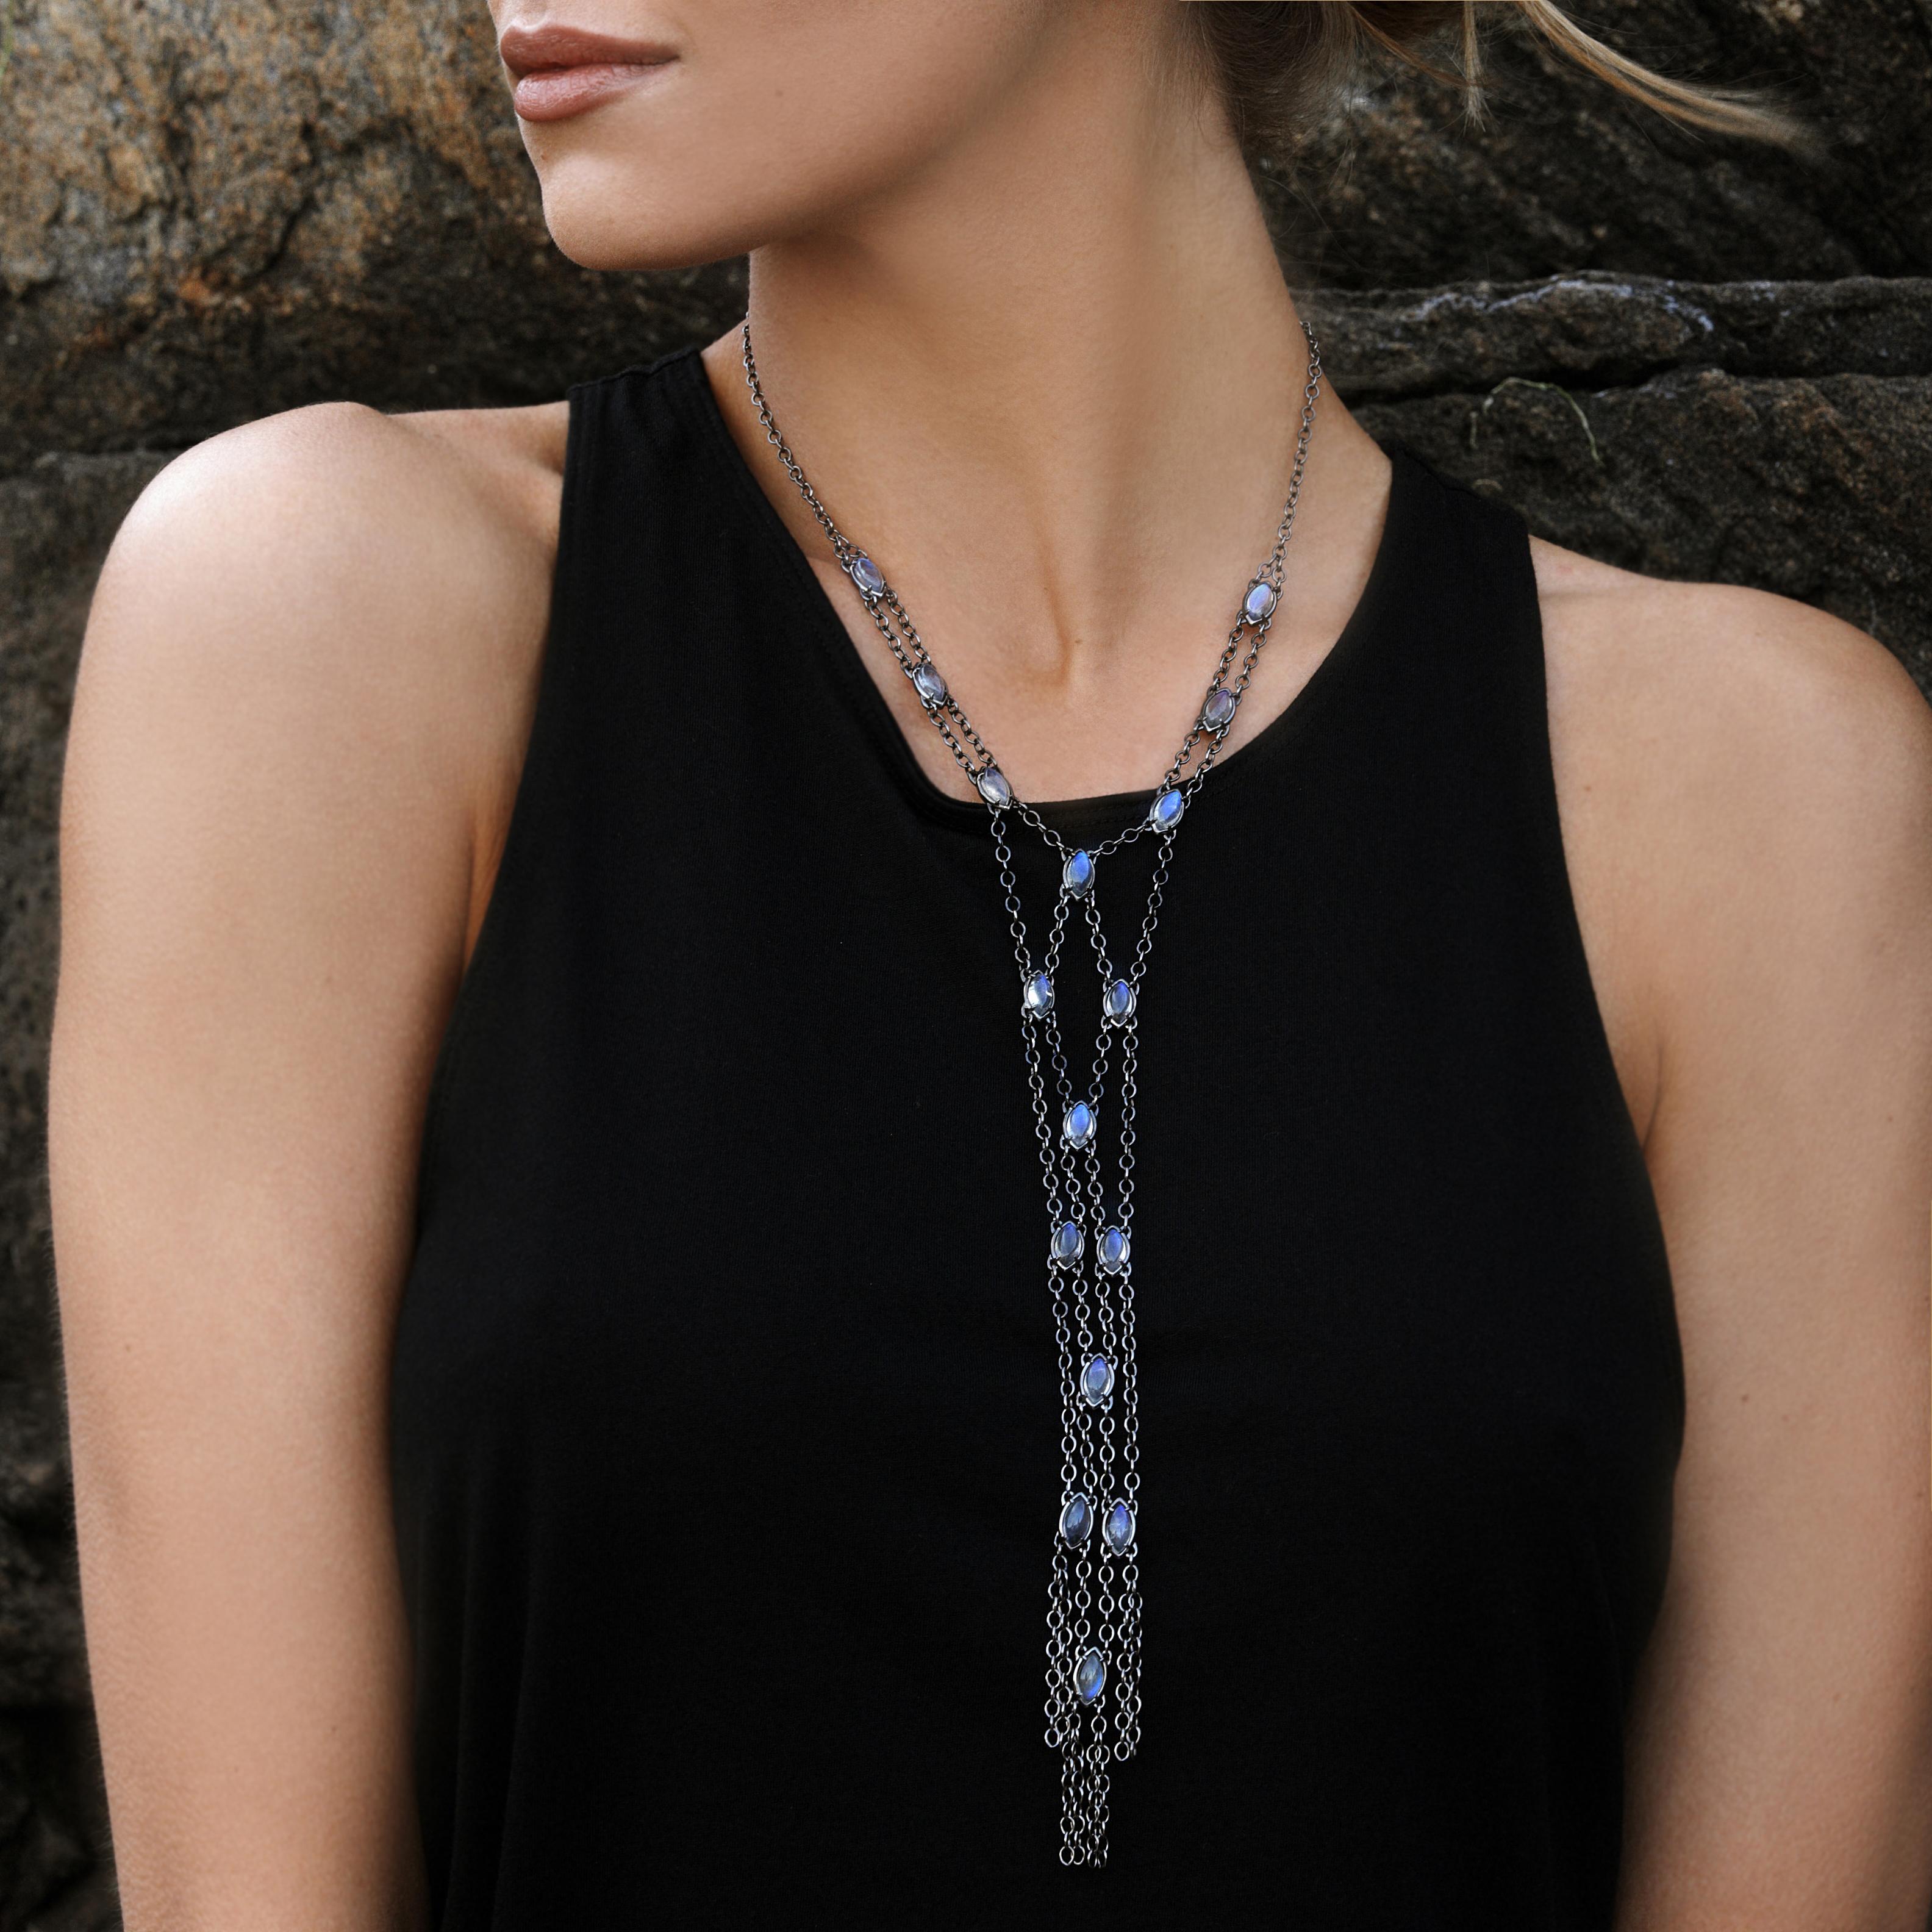 This sultry flowing Ribbon necklace consists of 16 luminous labradorite marquise cabochons set into draping mesh sterling silver chain. 
The versatility of this piece is wide ranging, functioning as a low key element inside a collared shirt or as a